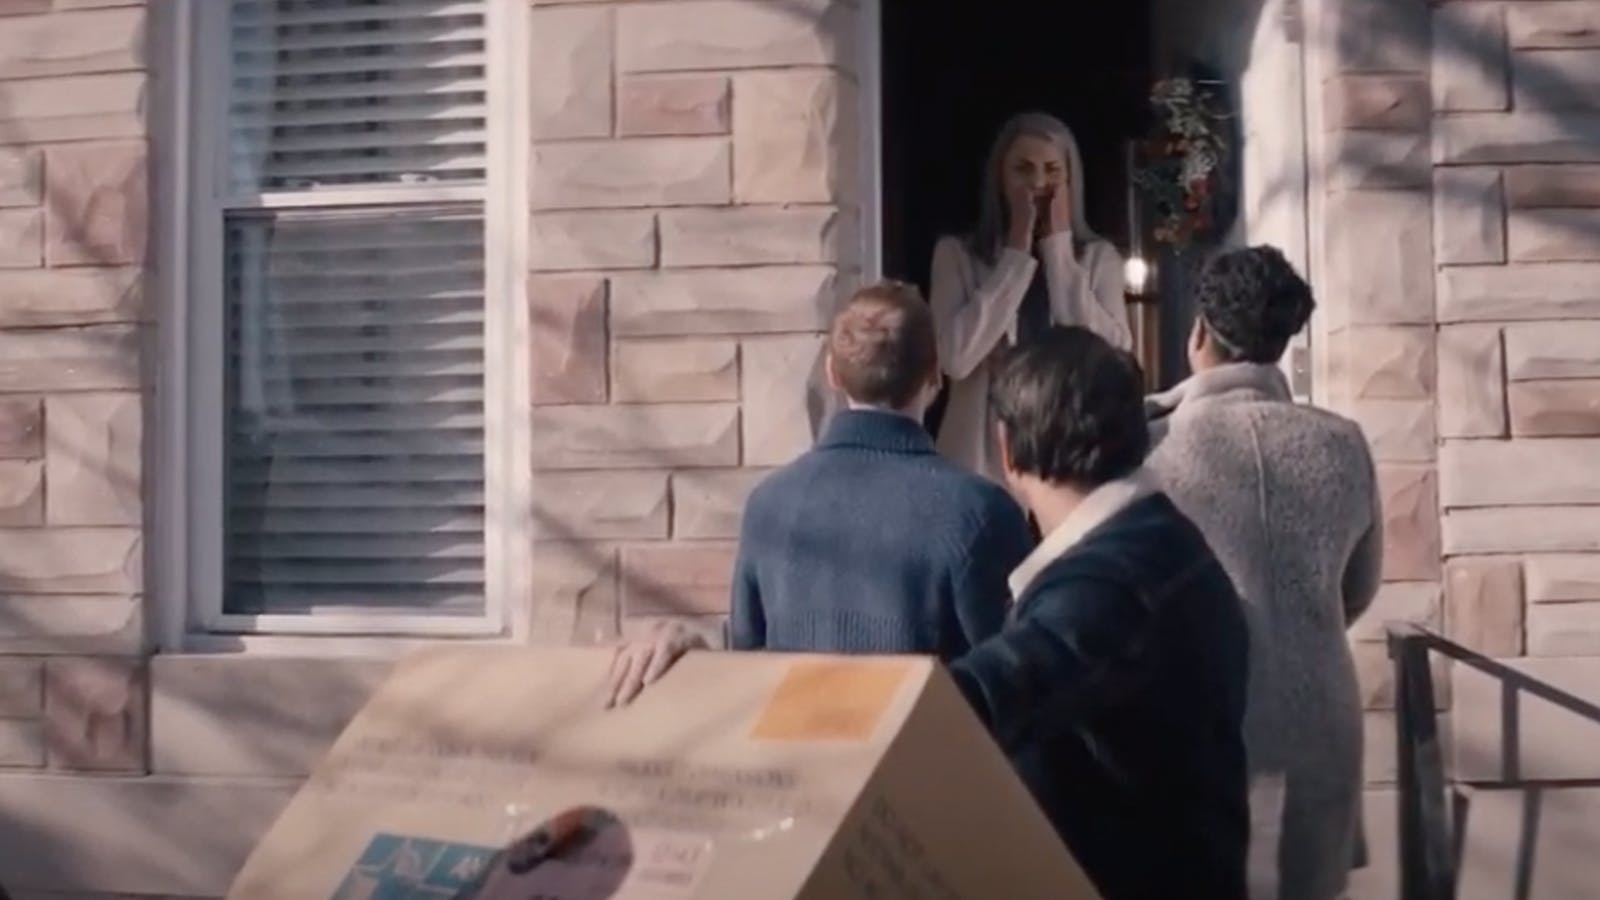 A surprised woman opens the door to find three guests in front of her home for the “Second Shift” LifeBridge campaign.